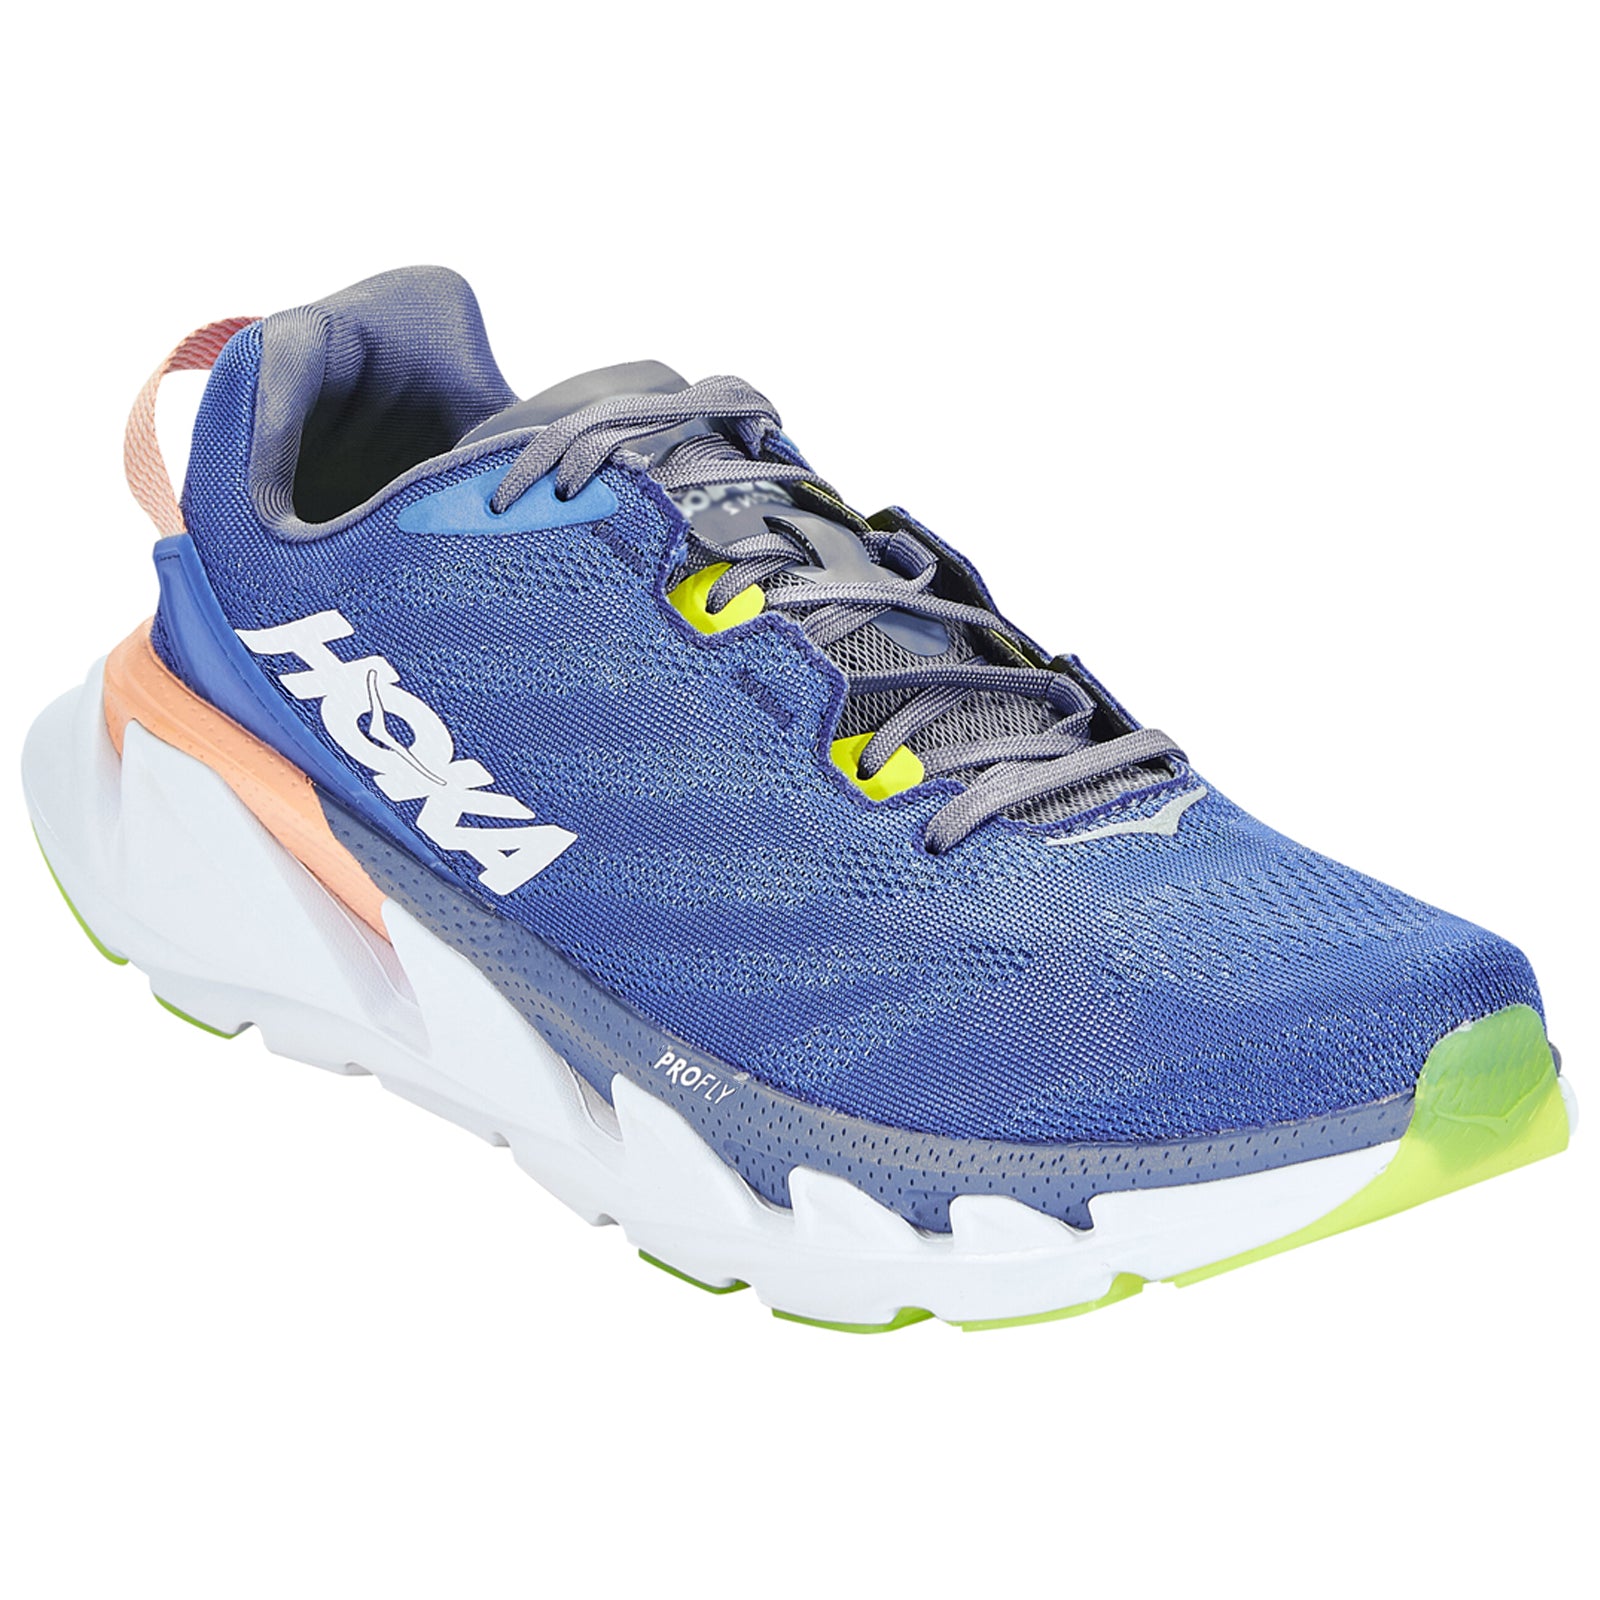 Hoka One One Elevon 2 Mesh Women's Low-Top Road Running Trainers#color_amparo blue white